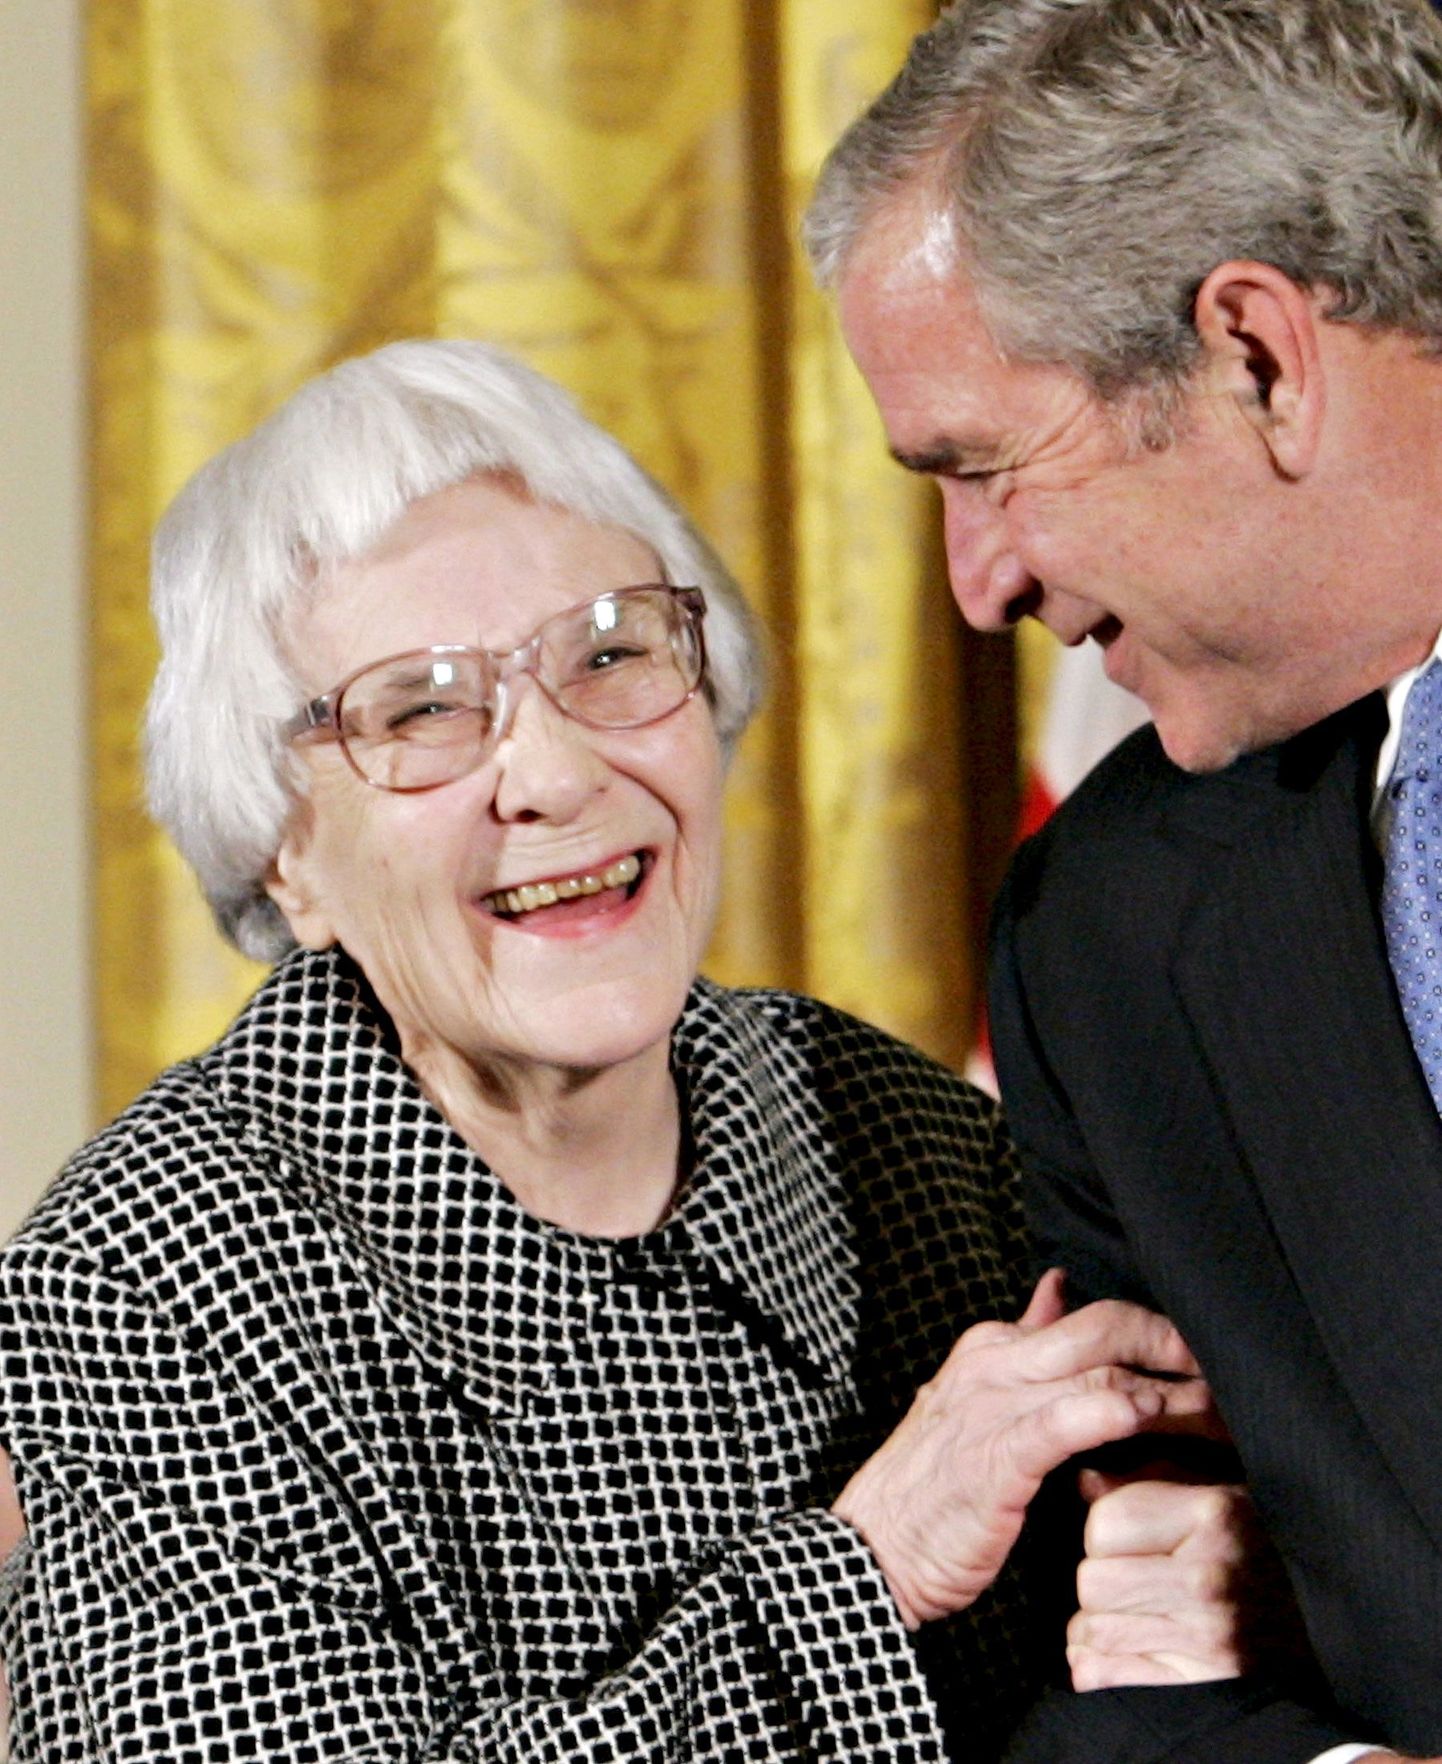 U.S. President George W. Bush smiles before awarding the Presidential Medal of Freedom to American novelist Harper Lee (L) in the East Room of the White House, Washington, in this November 5, 2007 file picture. Lee, who wrote one of America's most enduring literary classics, "To Kill a Mockingbird," about a child's view of right and wrong and waited 55 years to publish a second book with the same characters from a very different point of view, has died at the age of 89. REUTERS/Larry Downing/Files TPX IMAGES OF THE DAY